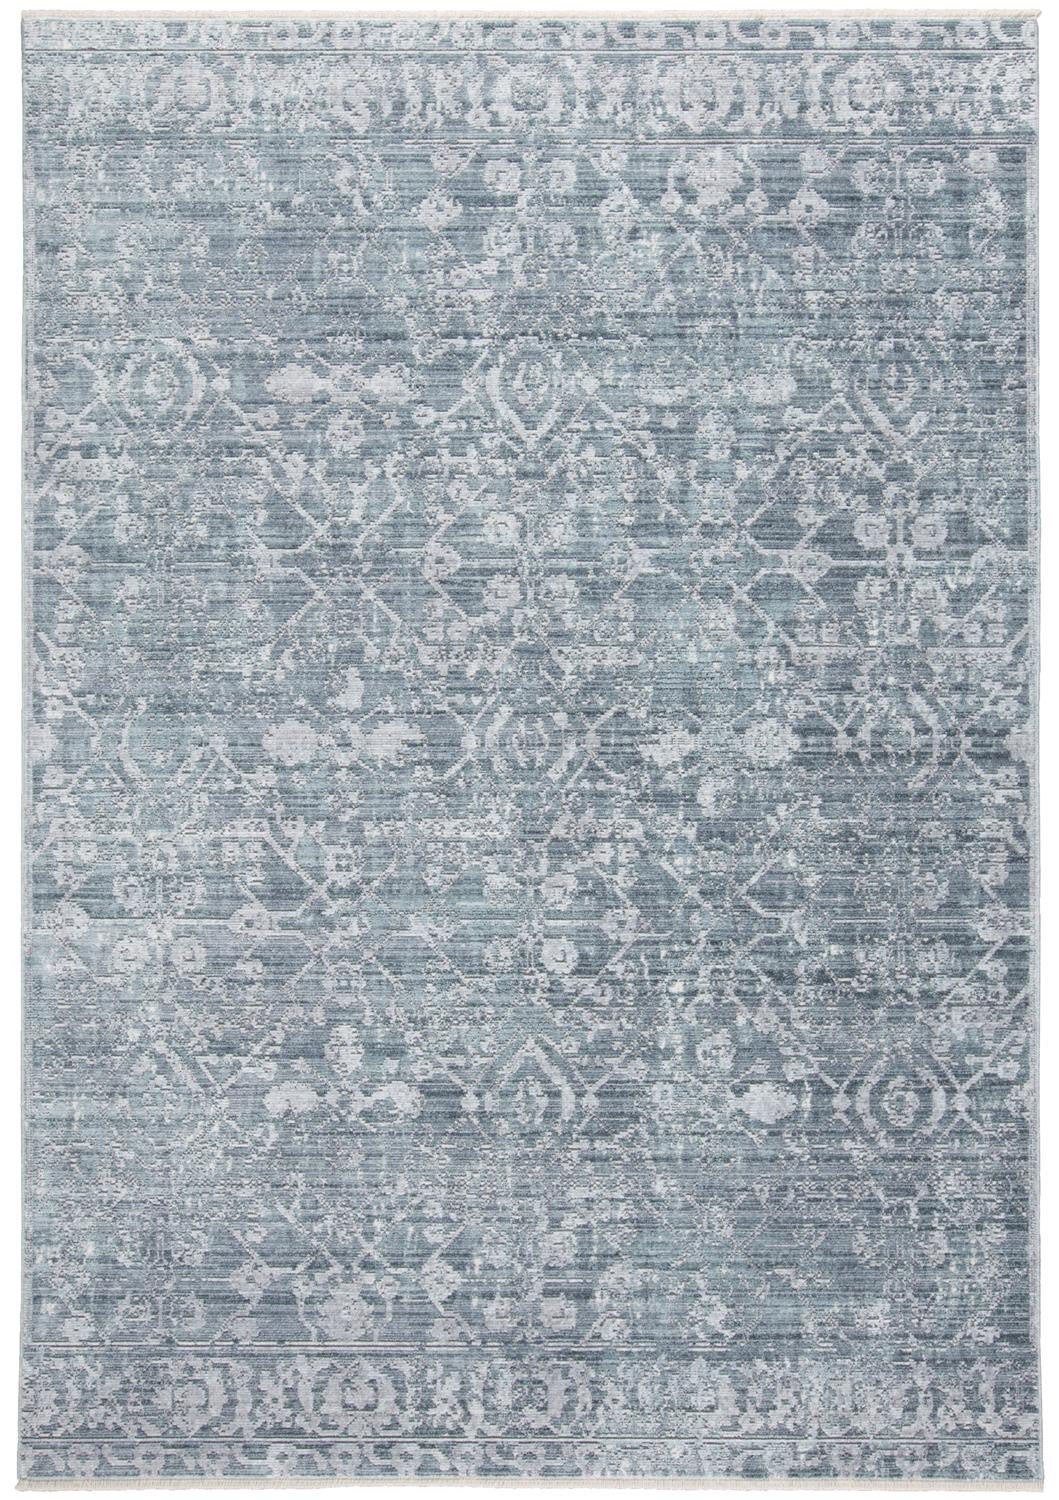 5' X 8' Blue Gray And Silver Abstract Distressed Area Rug With Fringe